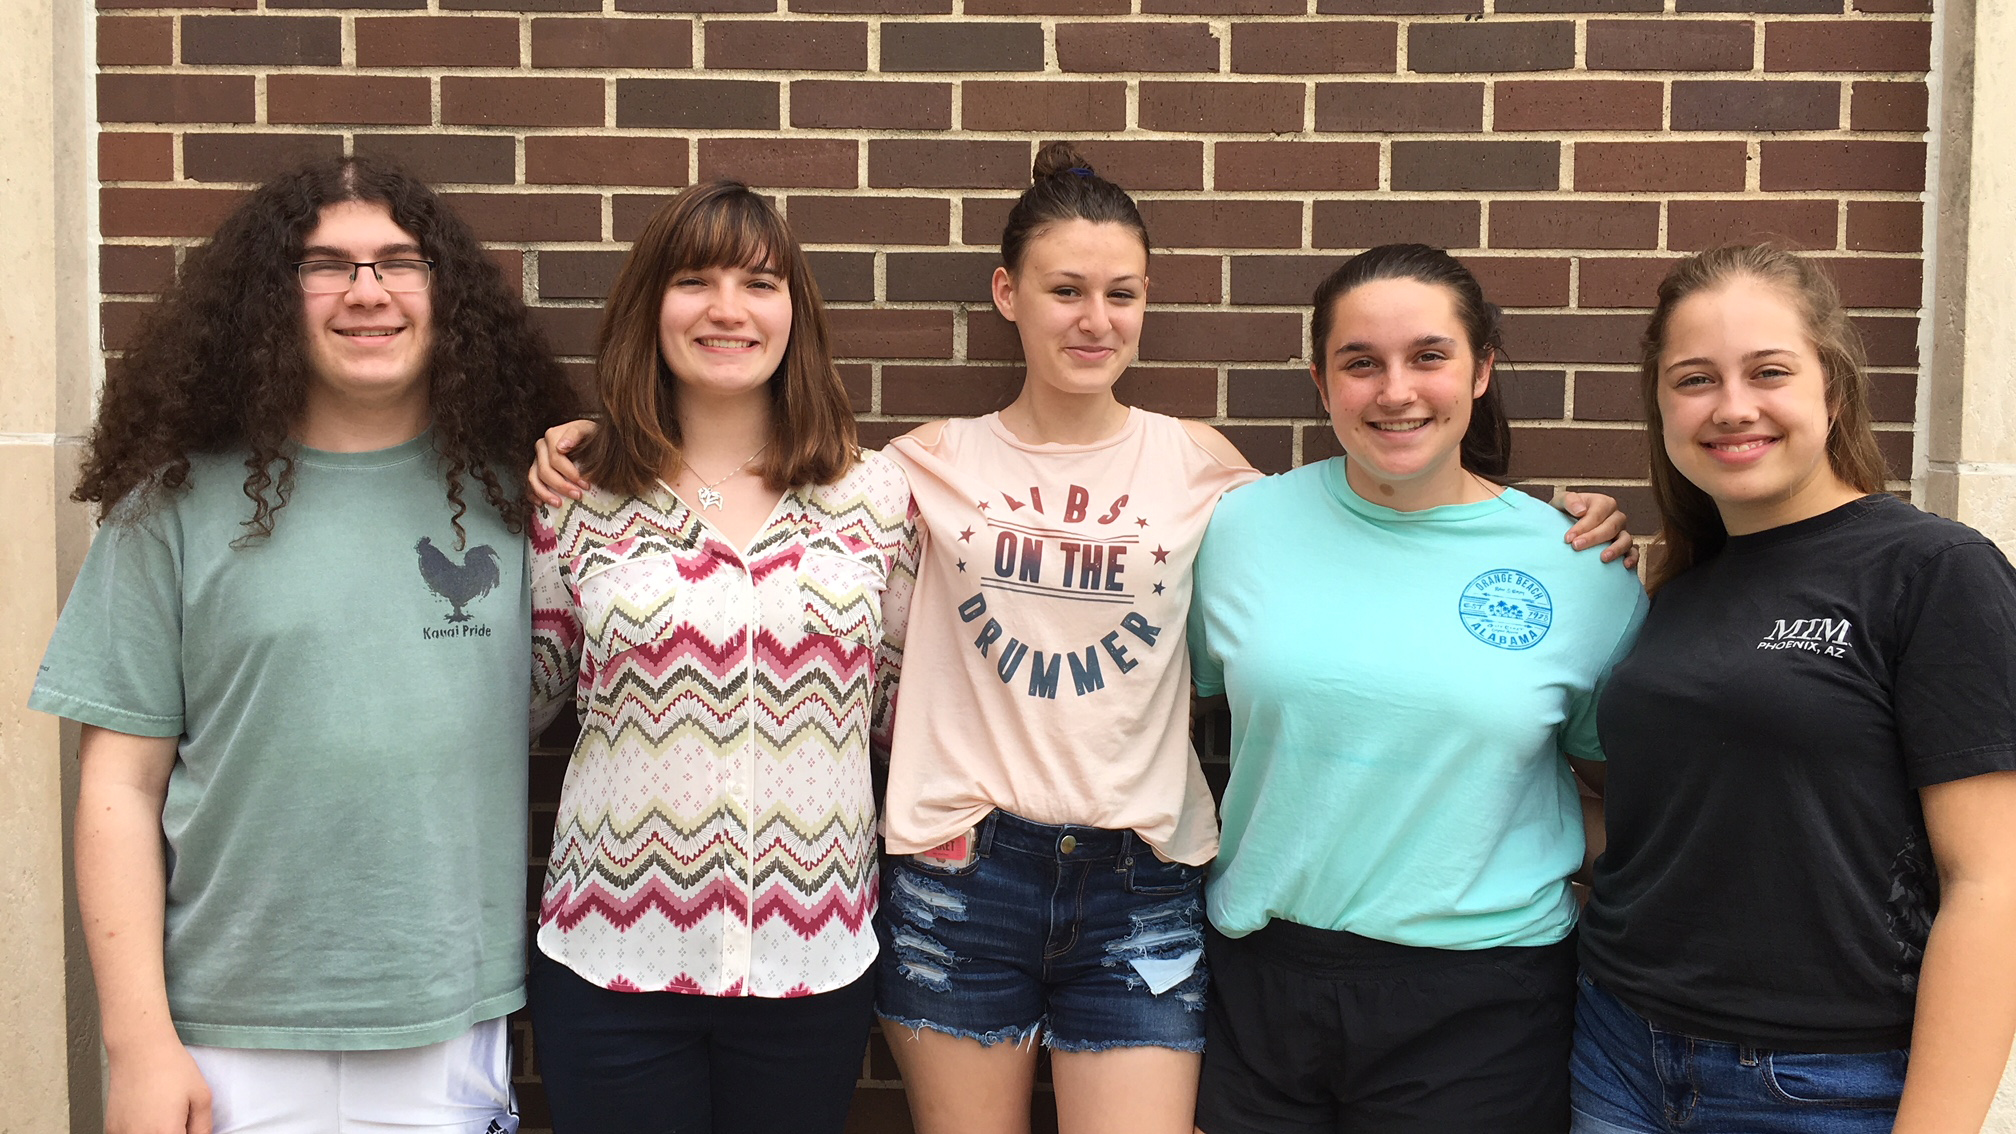 Five AHS students selected for state honors program